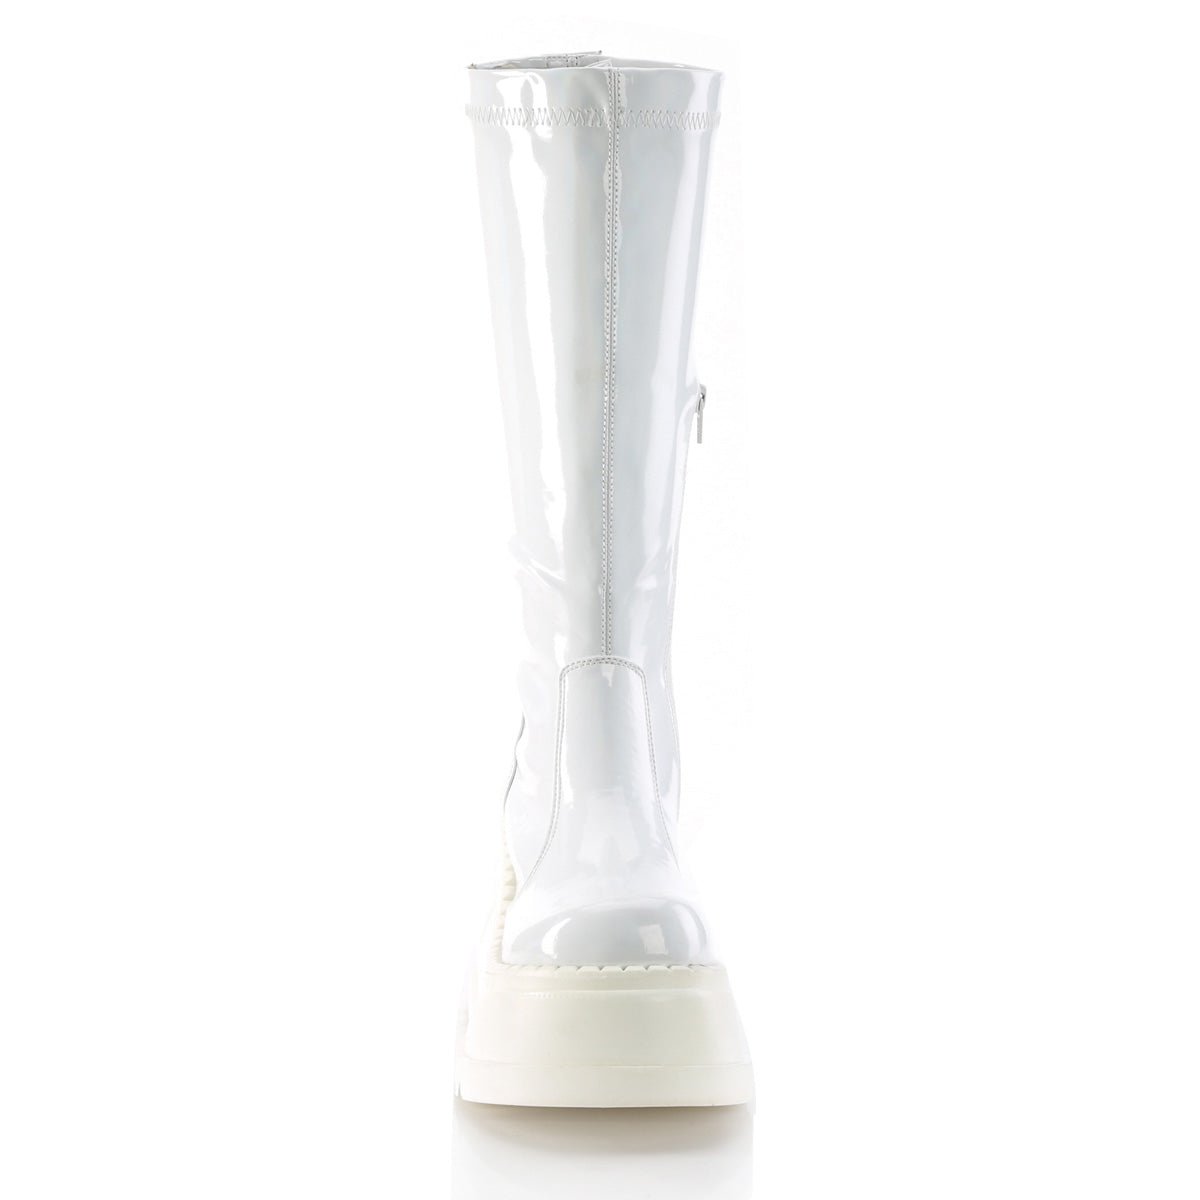 Too Fast | Demonia Stomp 200 | White Hologram Stretch Patent Leather Women's Knee High Boots